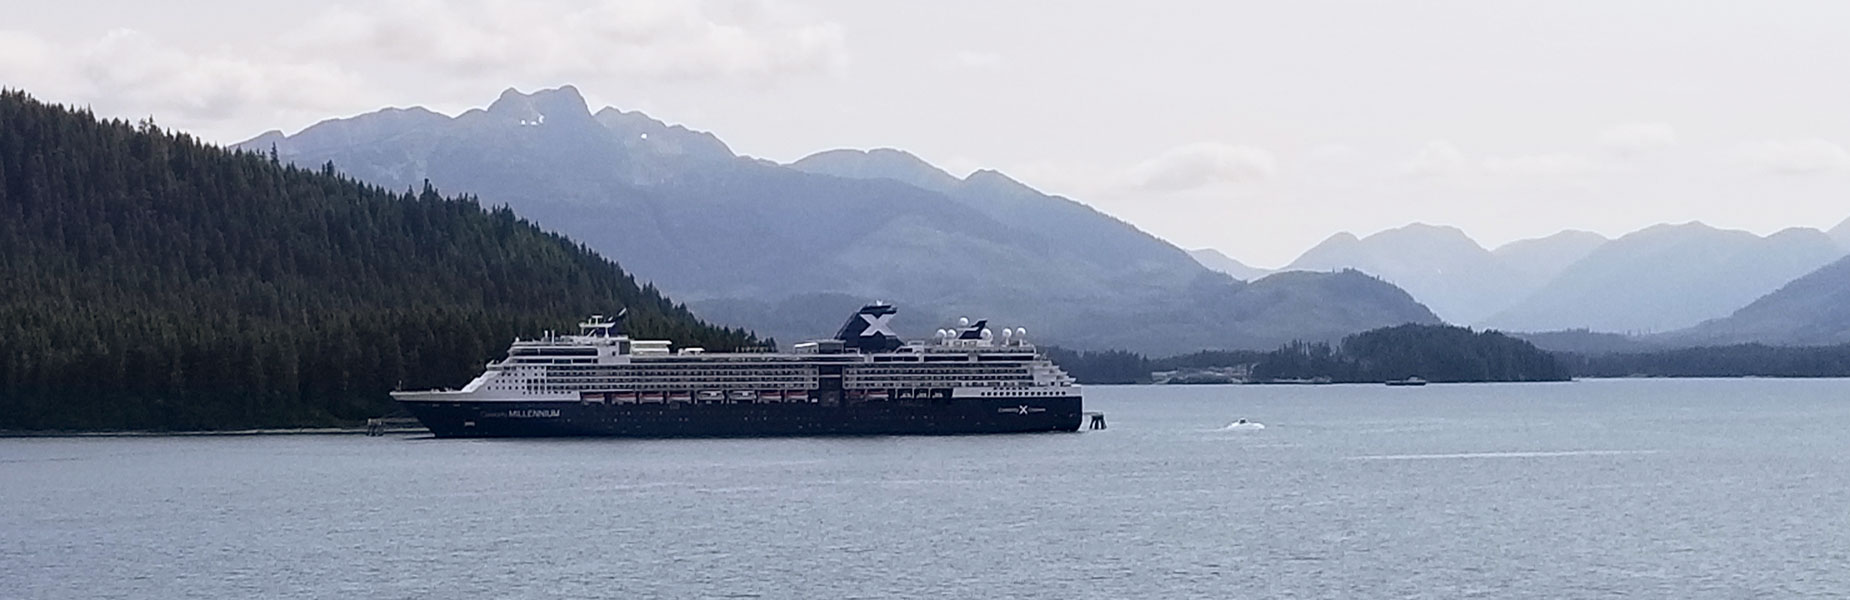 Icy Straight Point and Hoonah Alaska are popular Alaskan cruise ship destinations, with whale watching tours being at the top of the to do list for visitors!